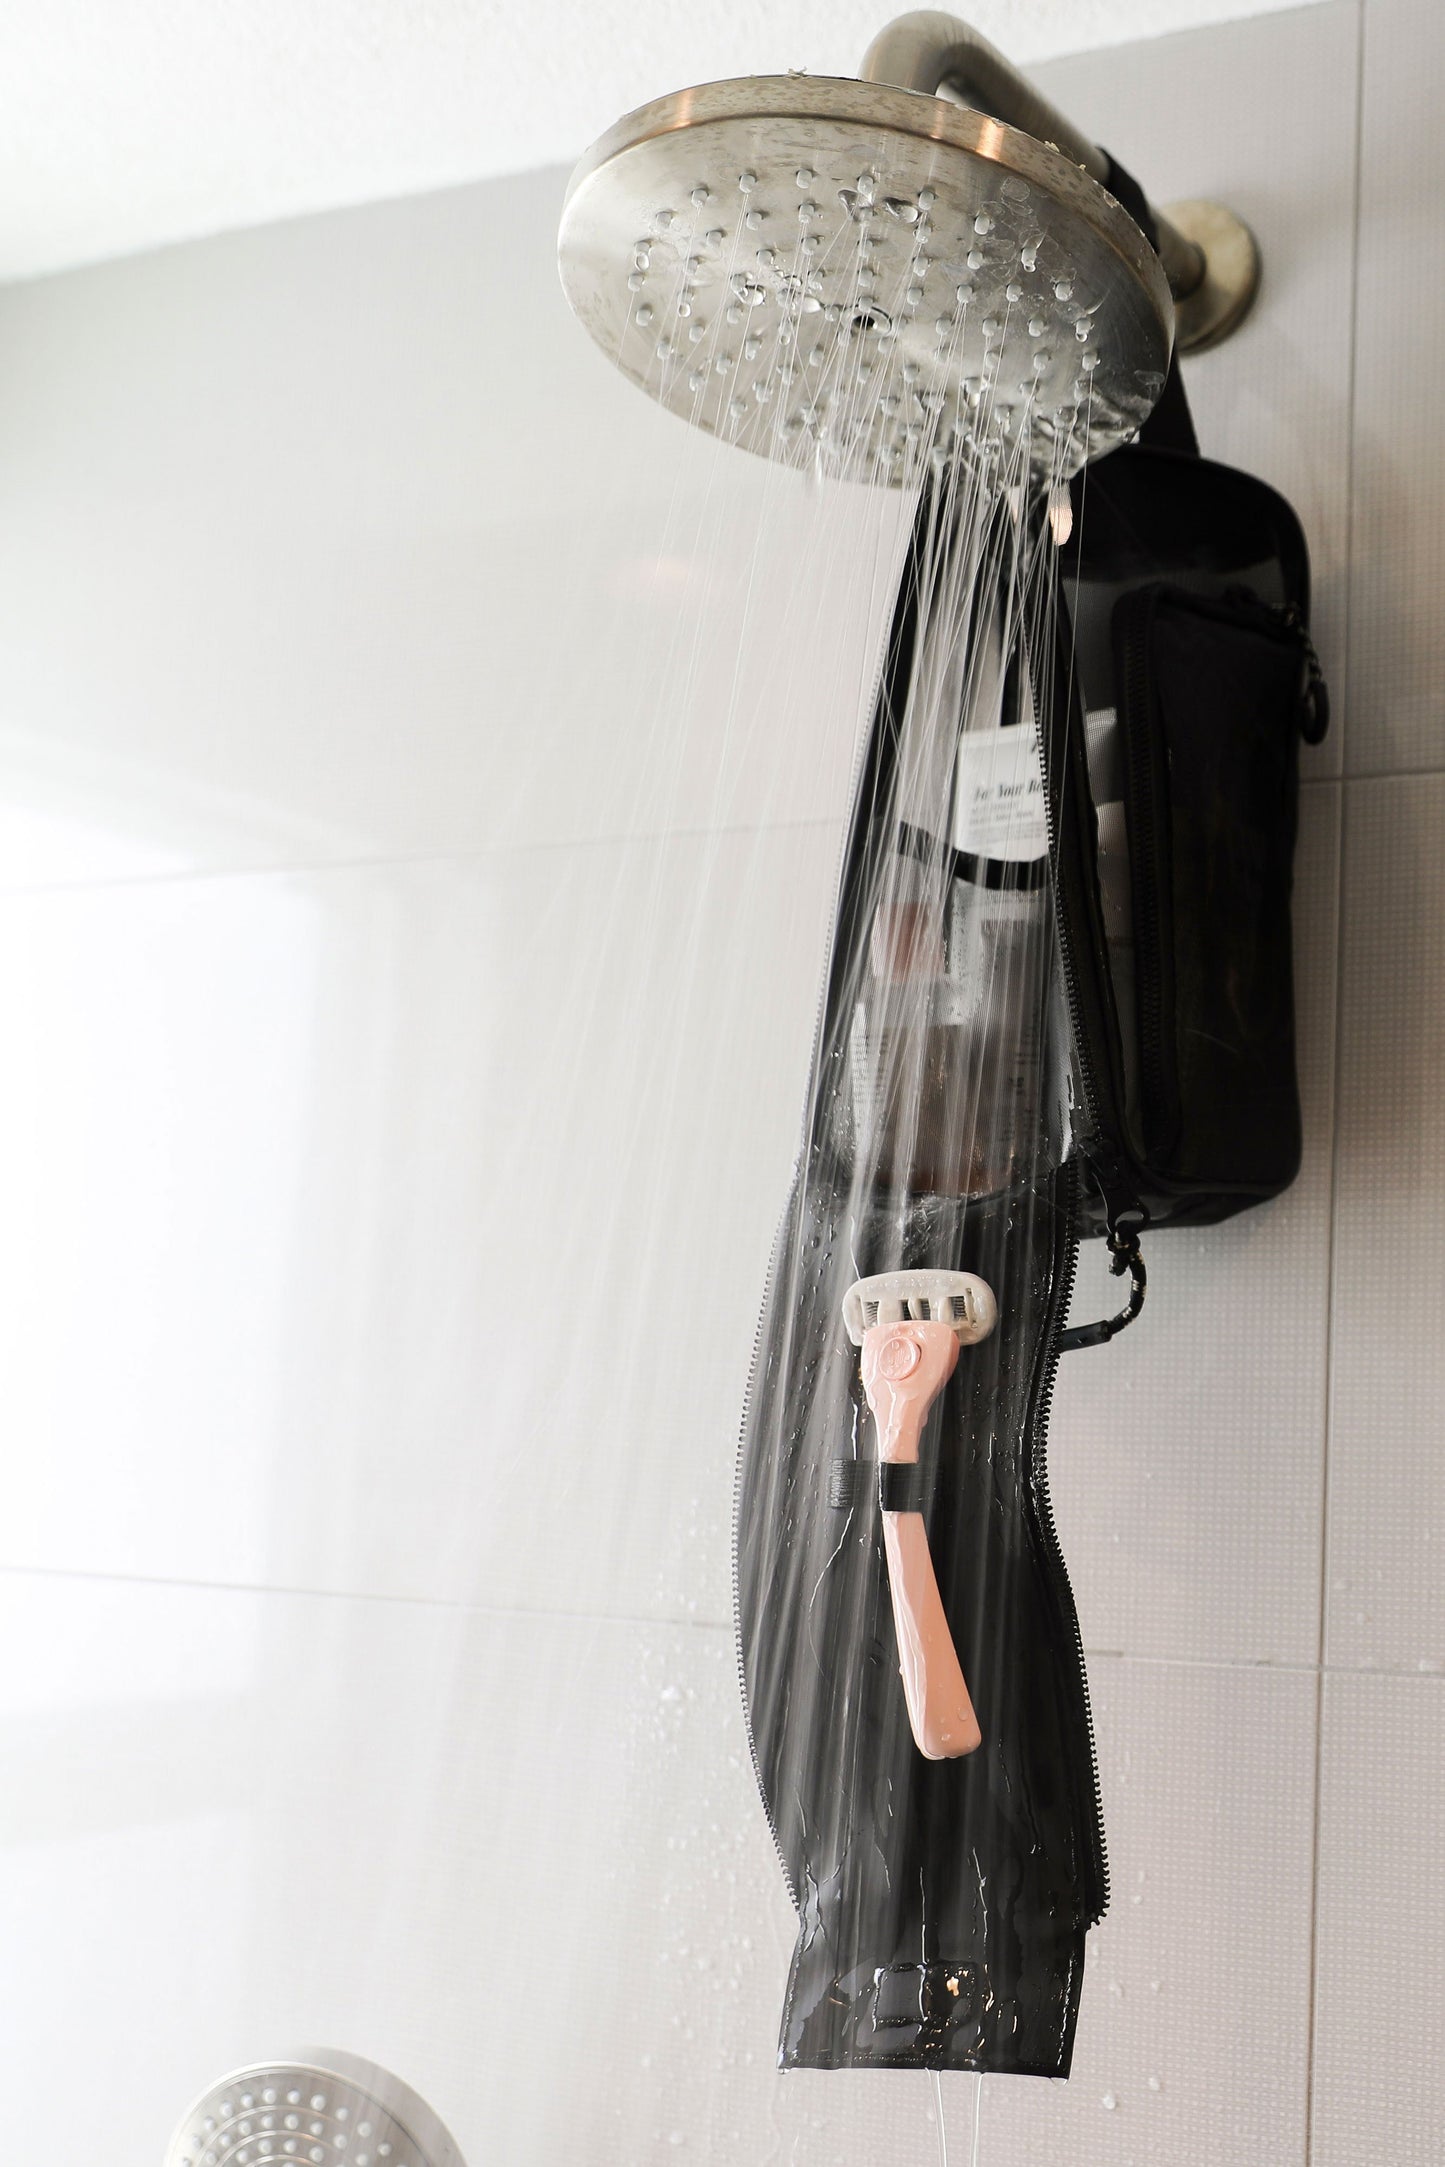 The Hanging Shower Caddy in Black